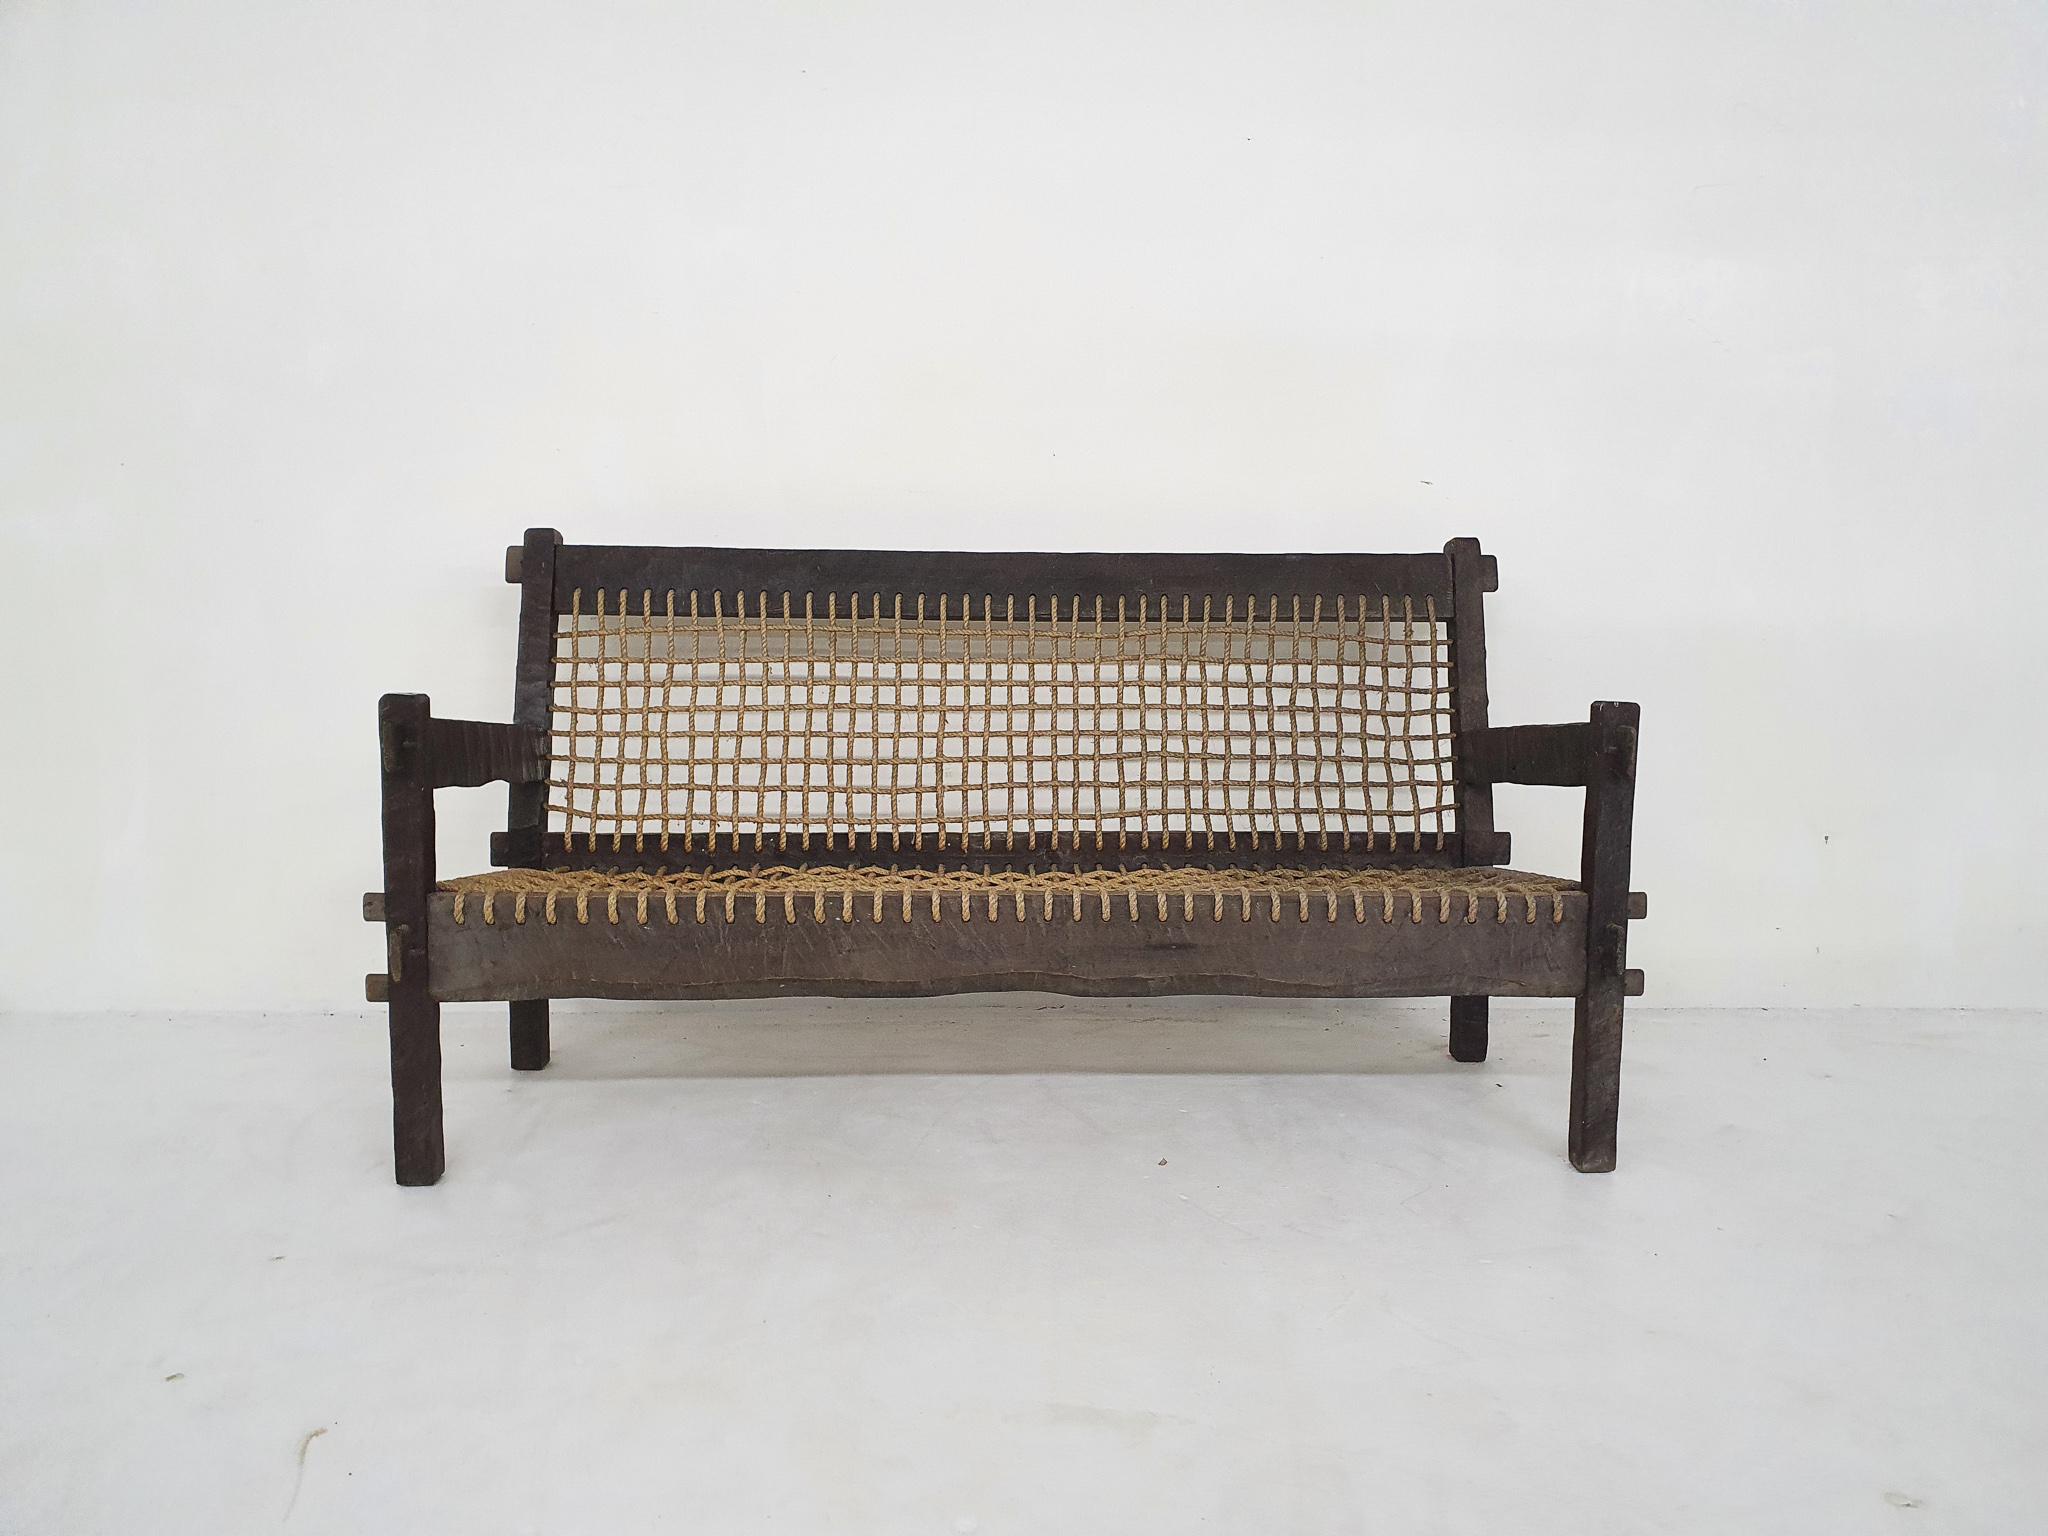 Beautifuly hand carved wooden sofa with rope seating and back.
